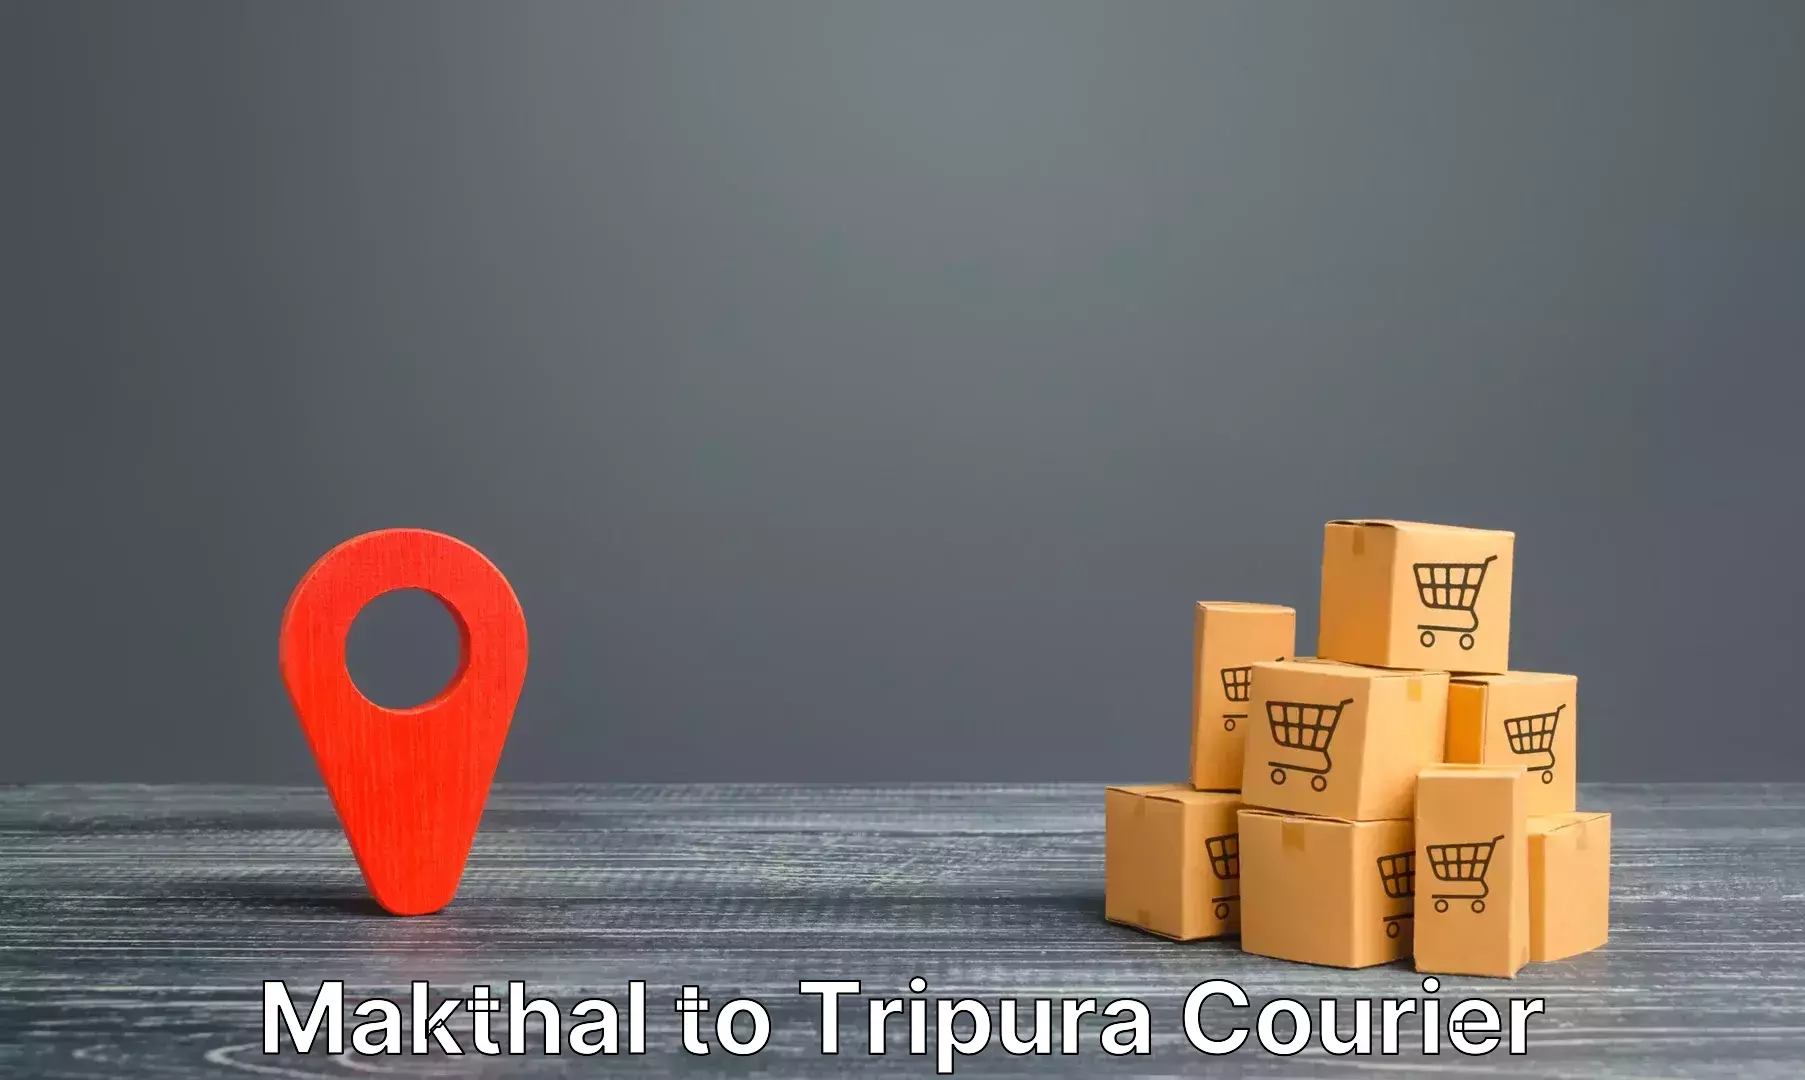 Luggage transport consultancy Makthal to Udaipur Tripura